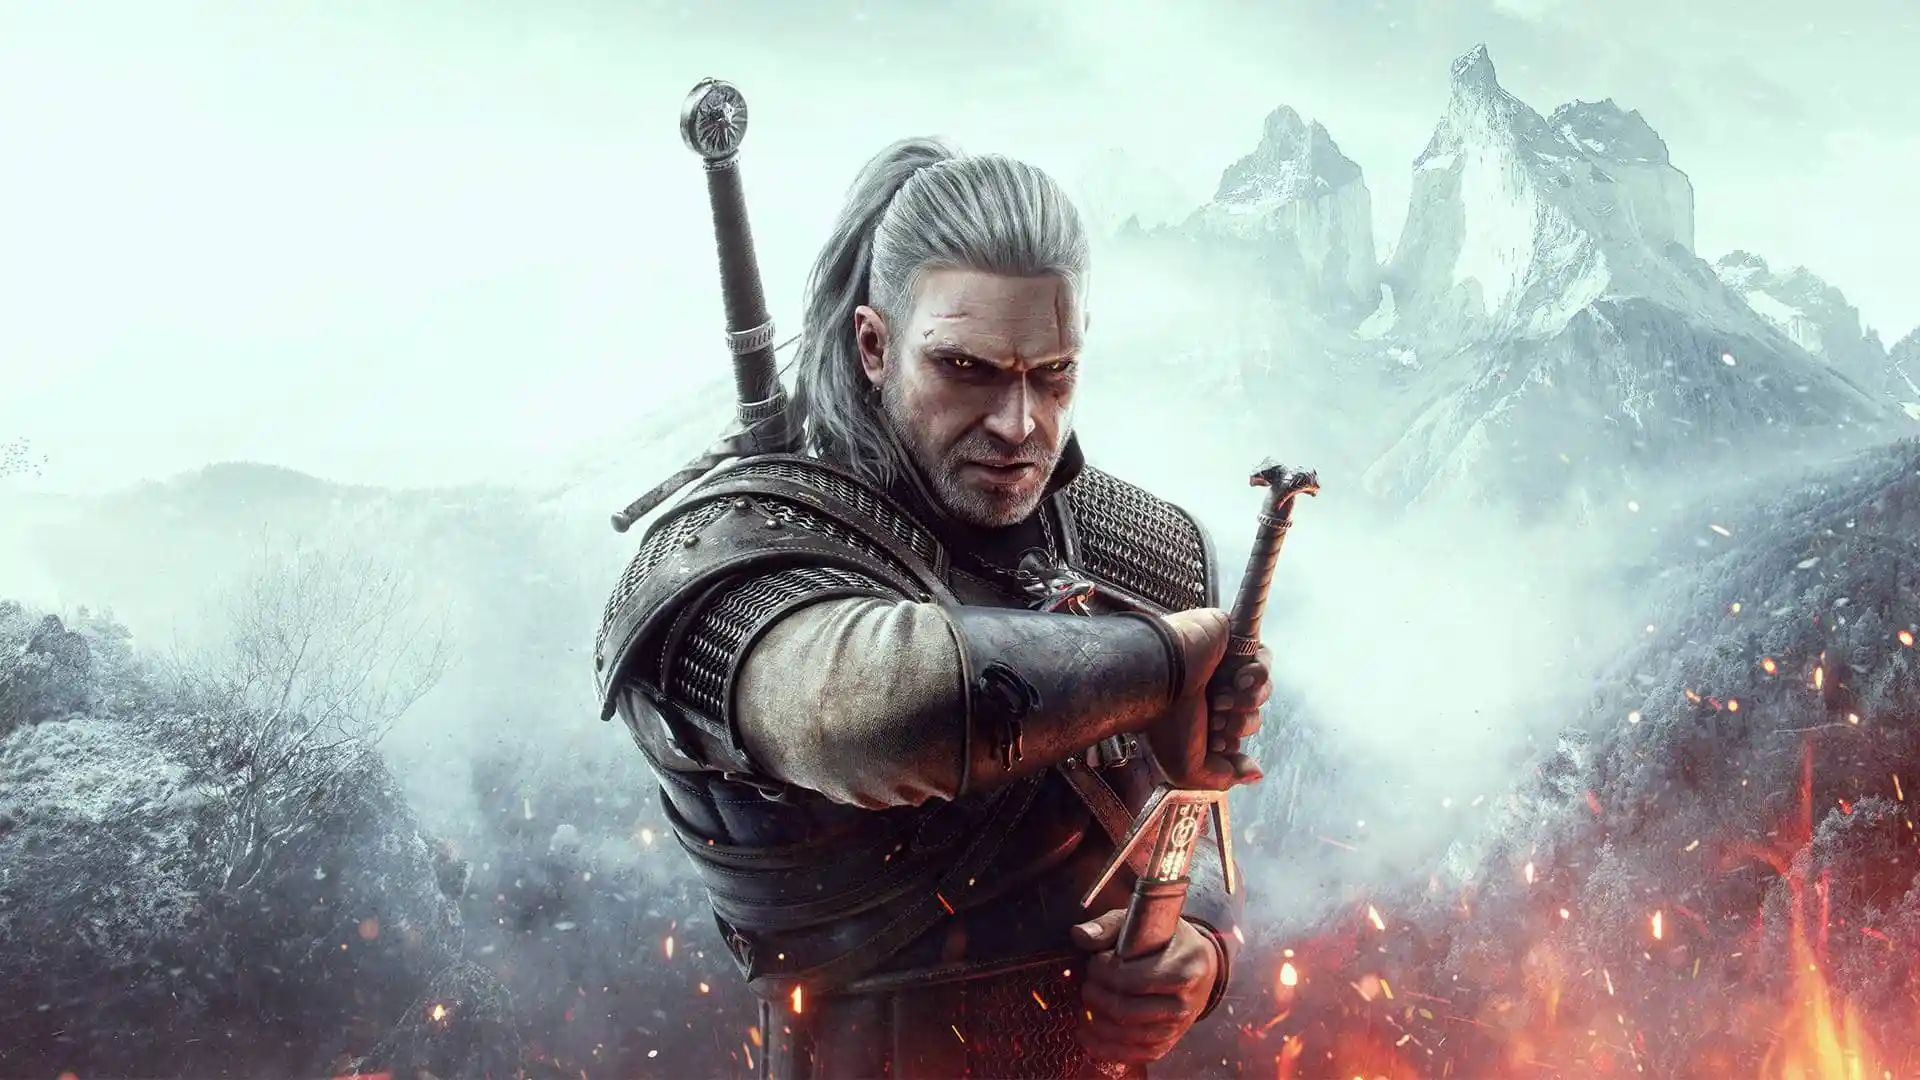 The Witcher: Path of Destiny by Go On Board